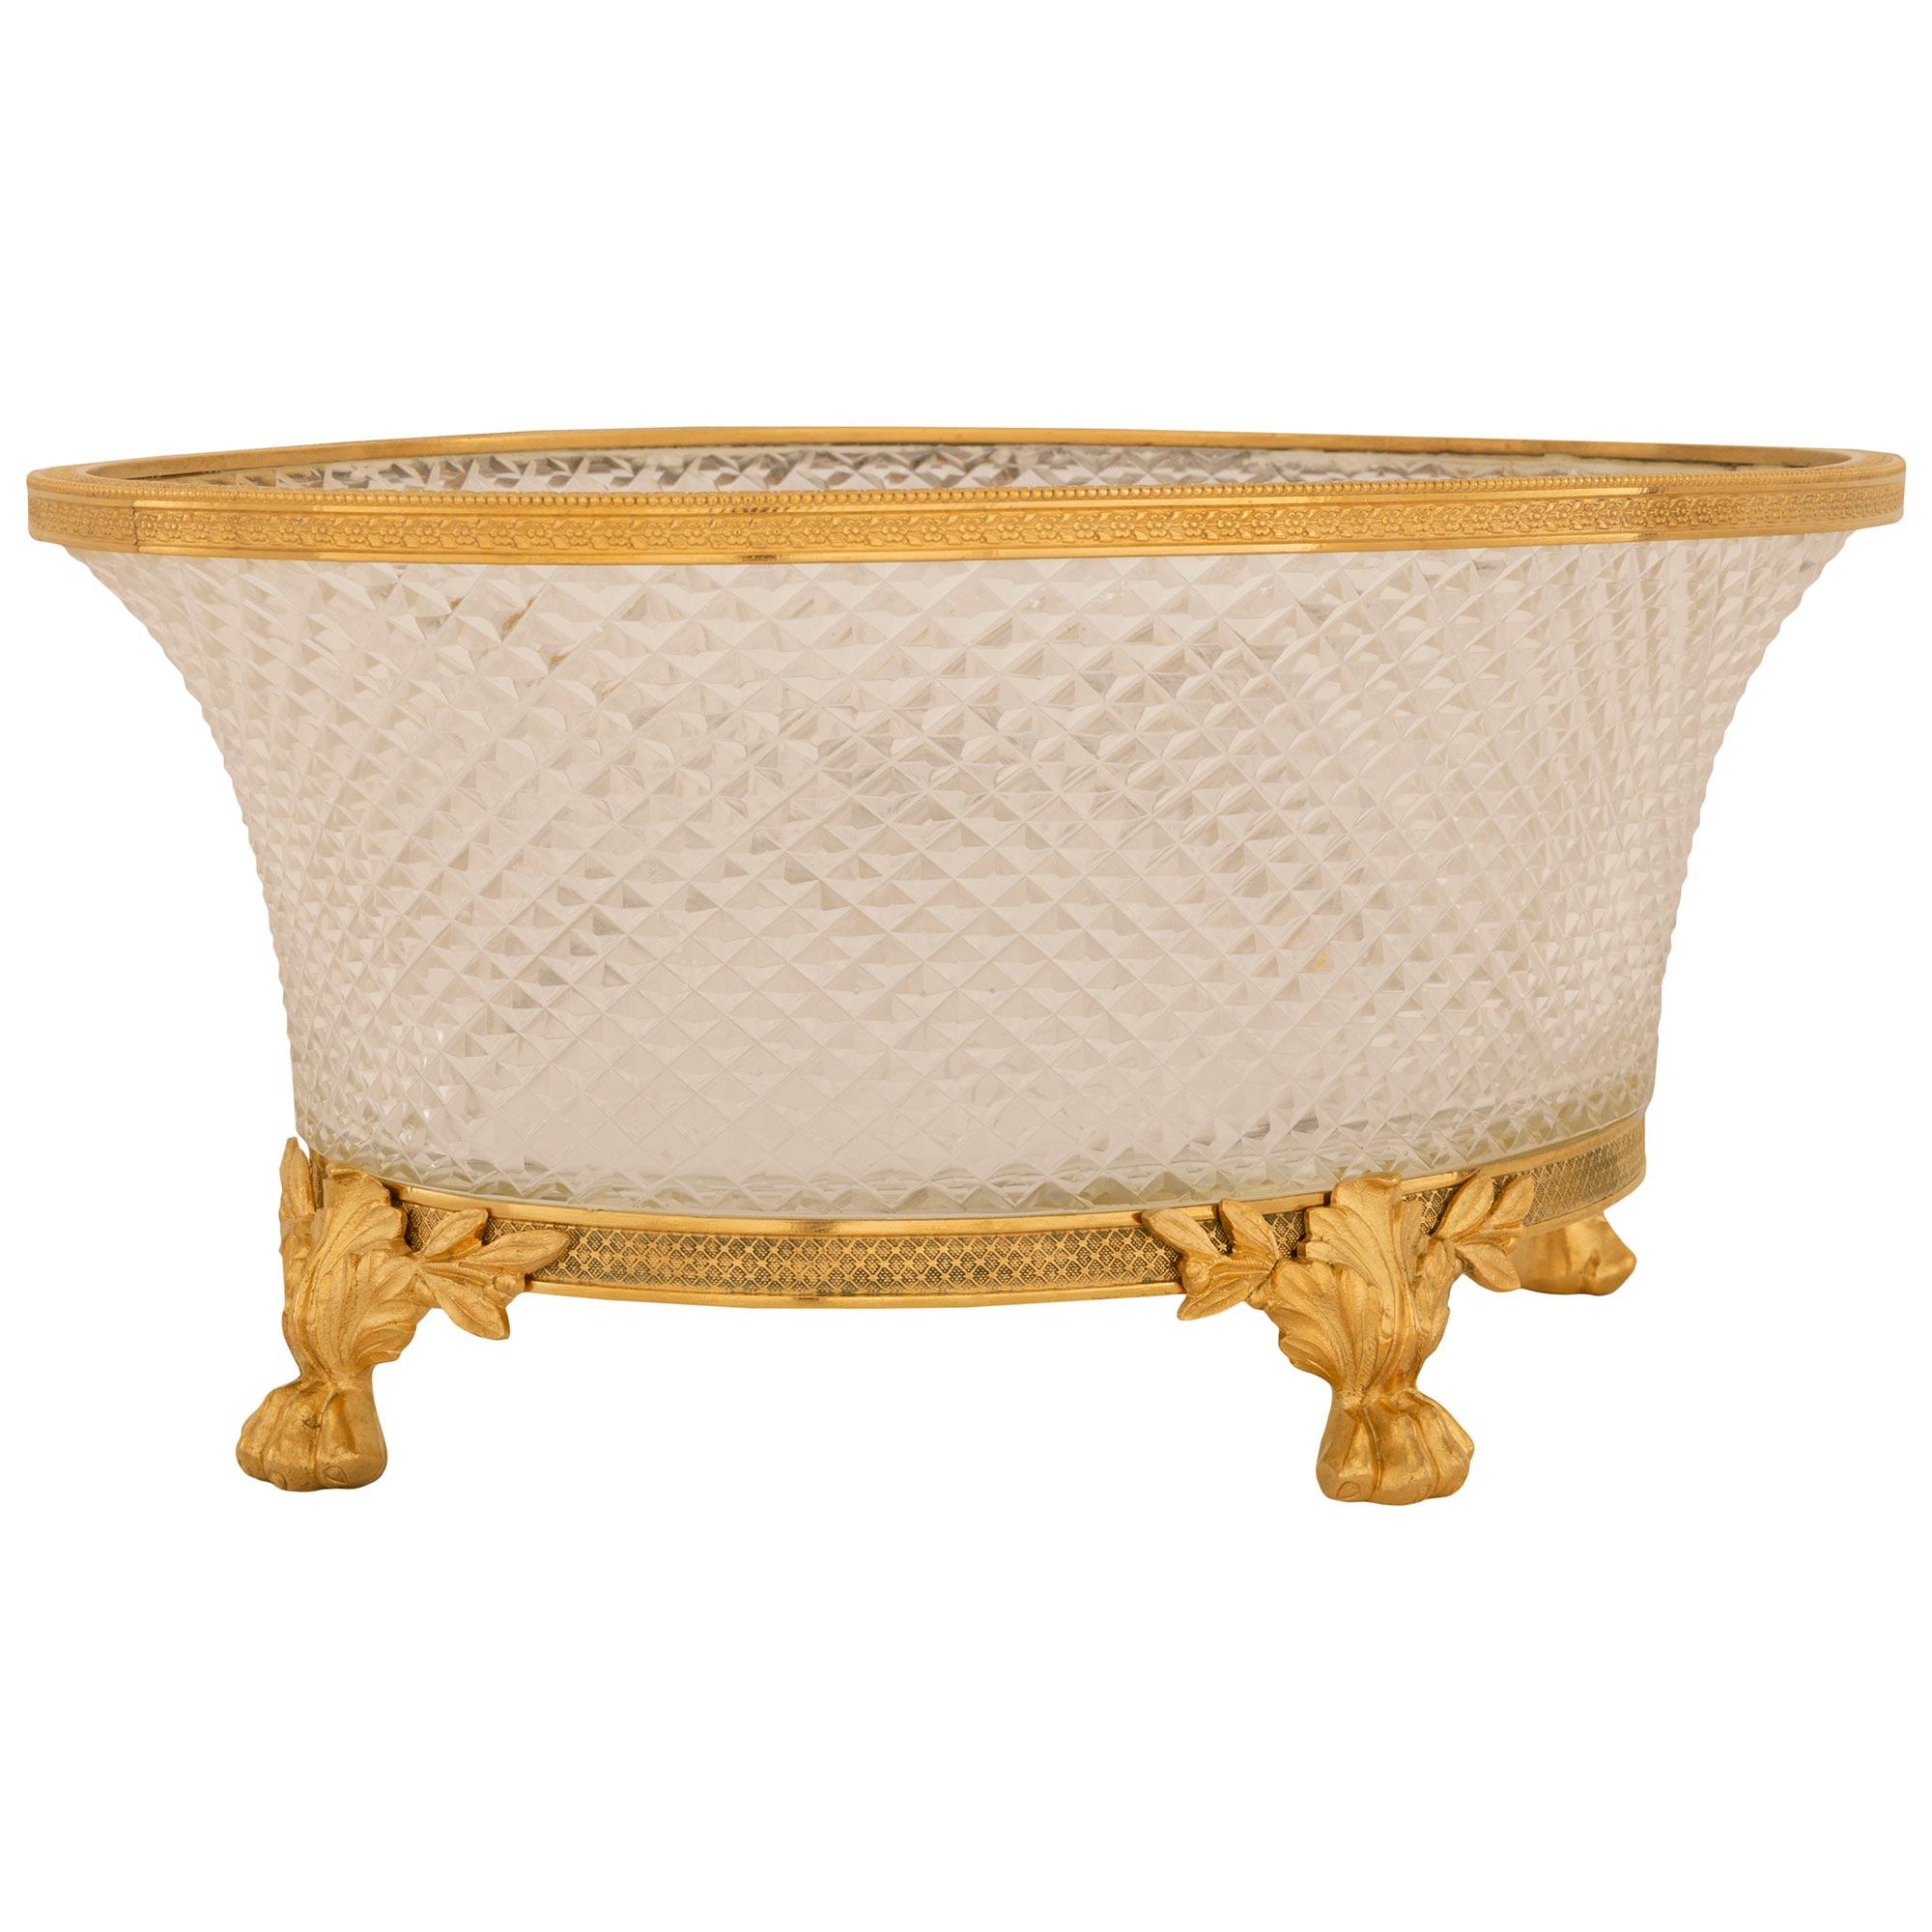 French 19th Century Belle Époque Period Baccarat Crystal and Ormolu Centerpiece In Good Condition For Sale In West Palm Beach, FL